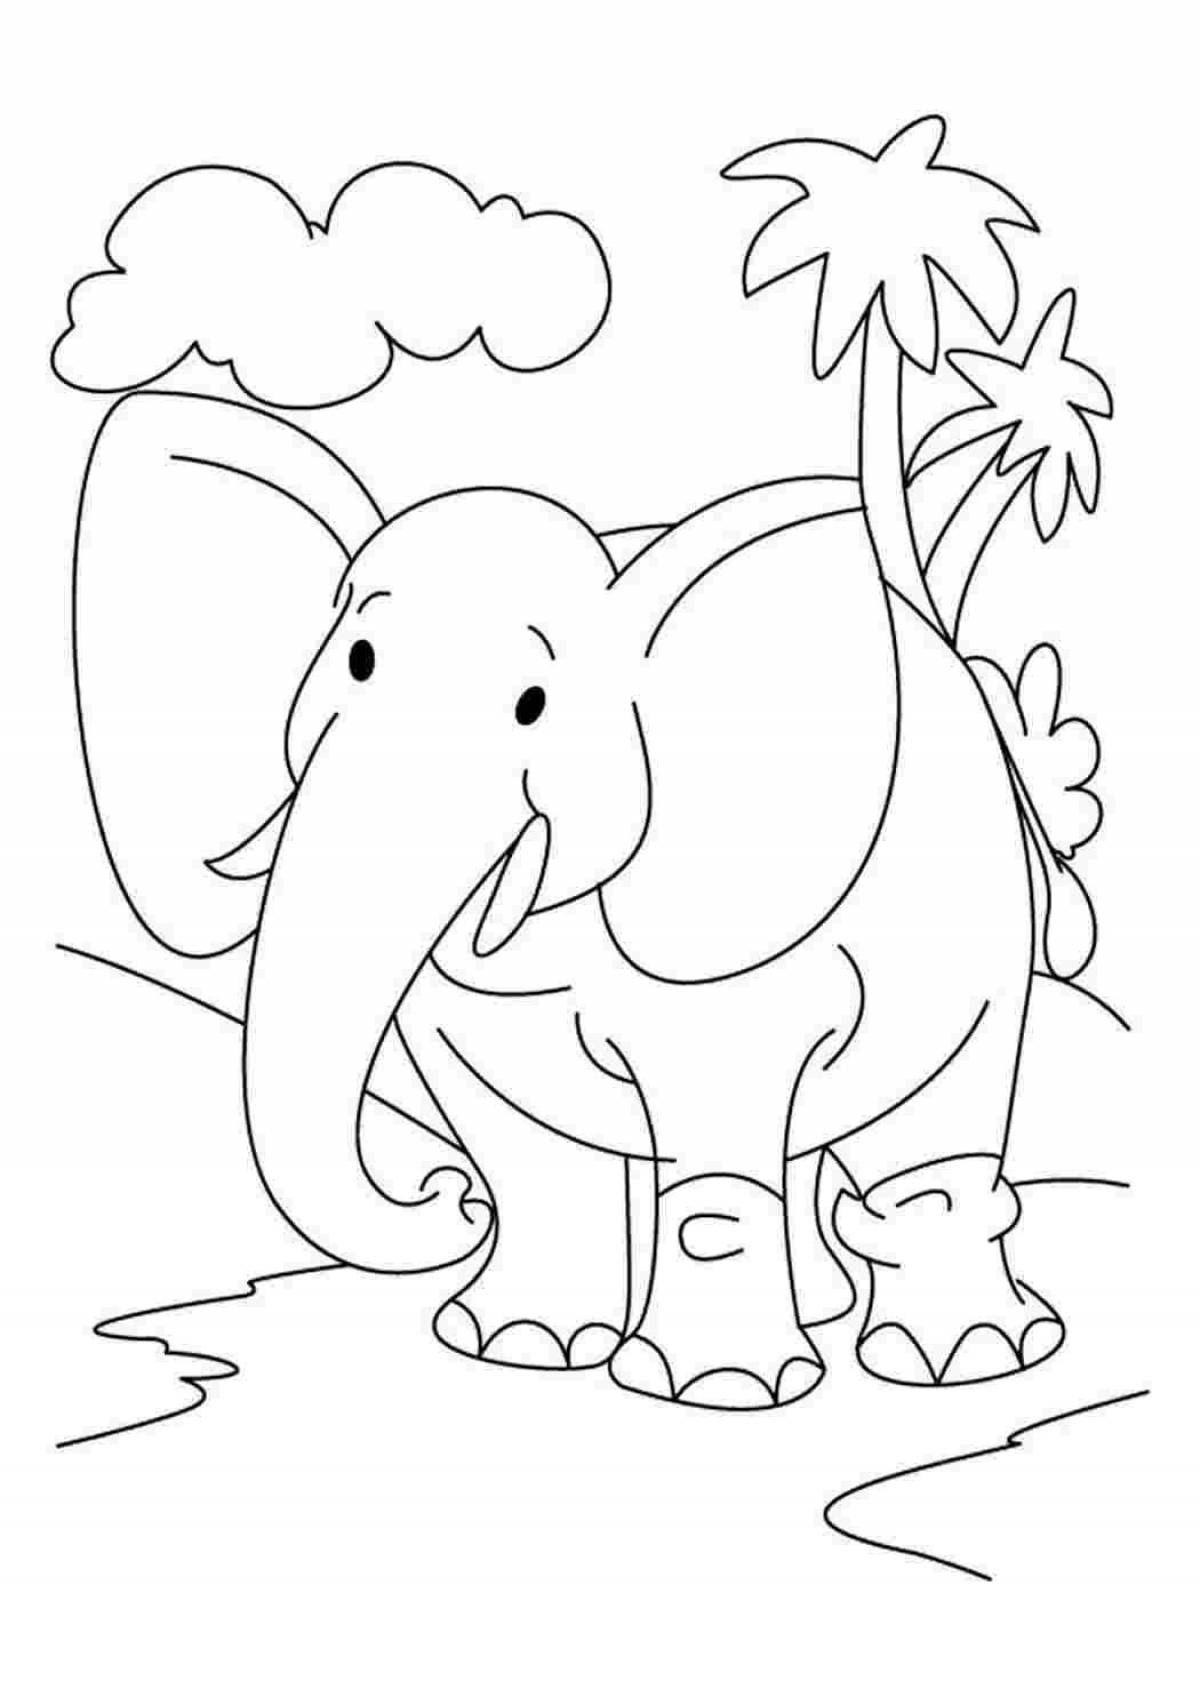 Dazzling drawing of an elephant